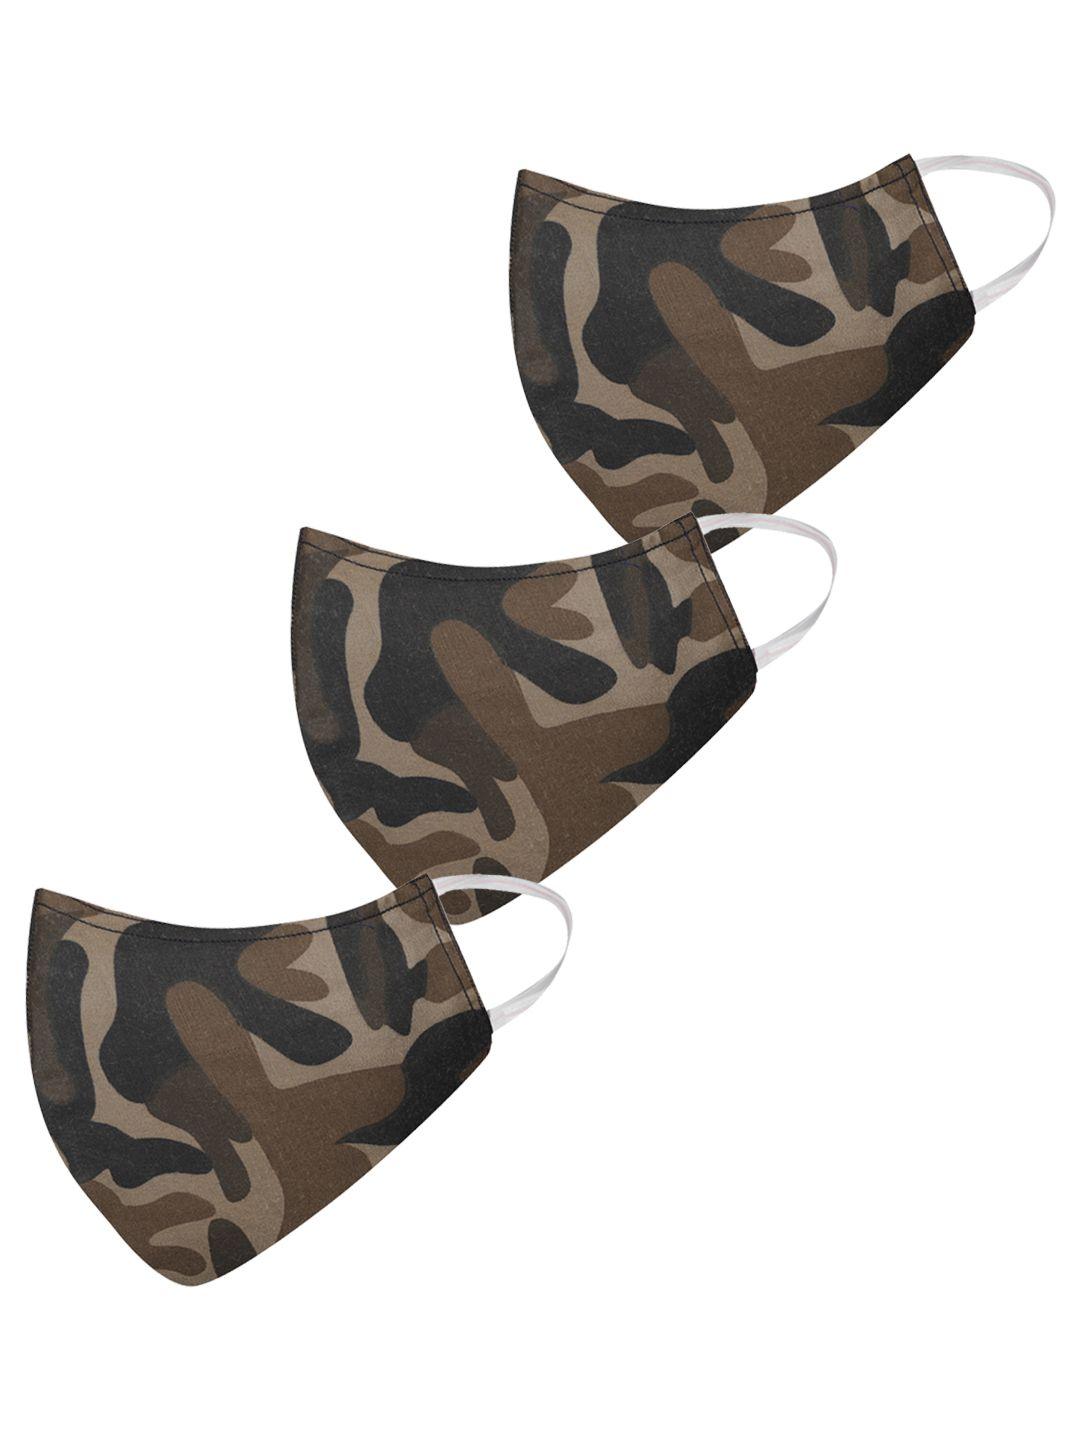 vastramay unisex set of 3 camouflage print reusable 3-ply protective outdoor face masks